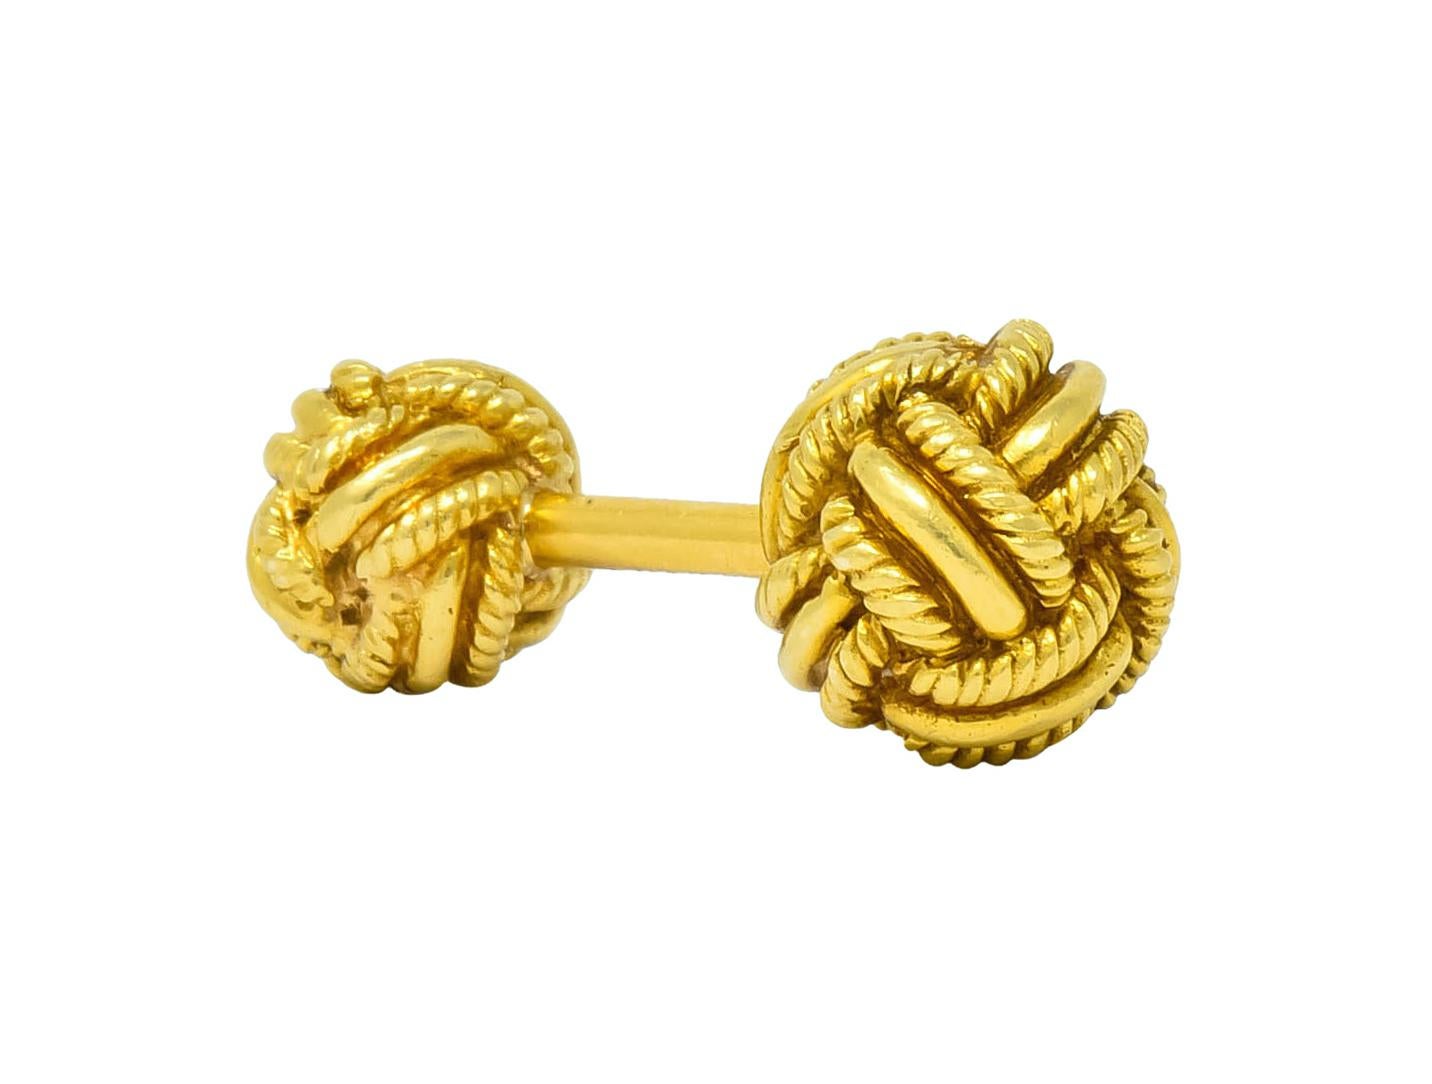 Bar style cufflinks terminating in one large knot and one small knot

Monkey's fist style knots comprised of textured, twisted rope motif

Signed Schlumberger and Tiffany

Tested as 18 karat gold

Circa 1980's

Length: 1 inch

Large knot measures: